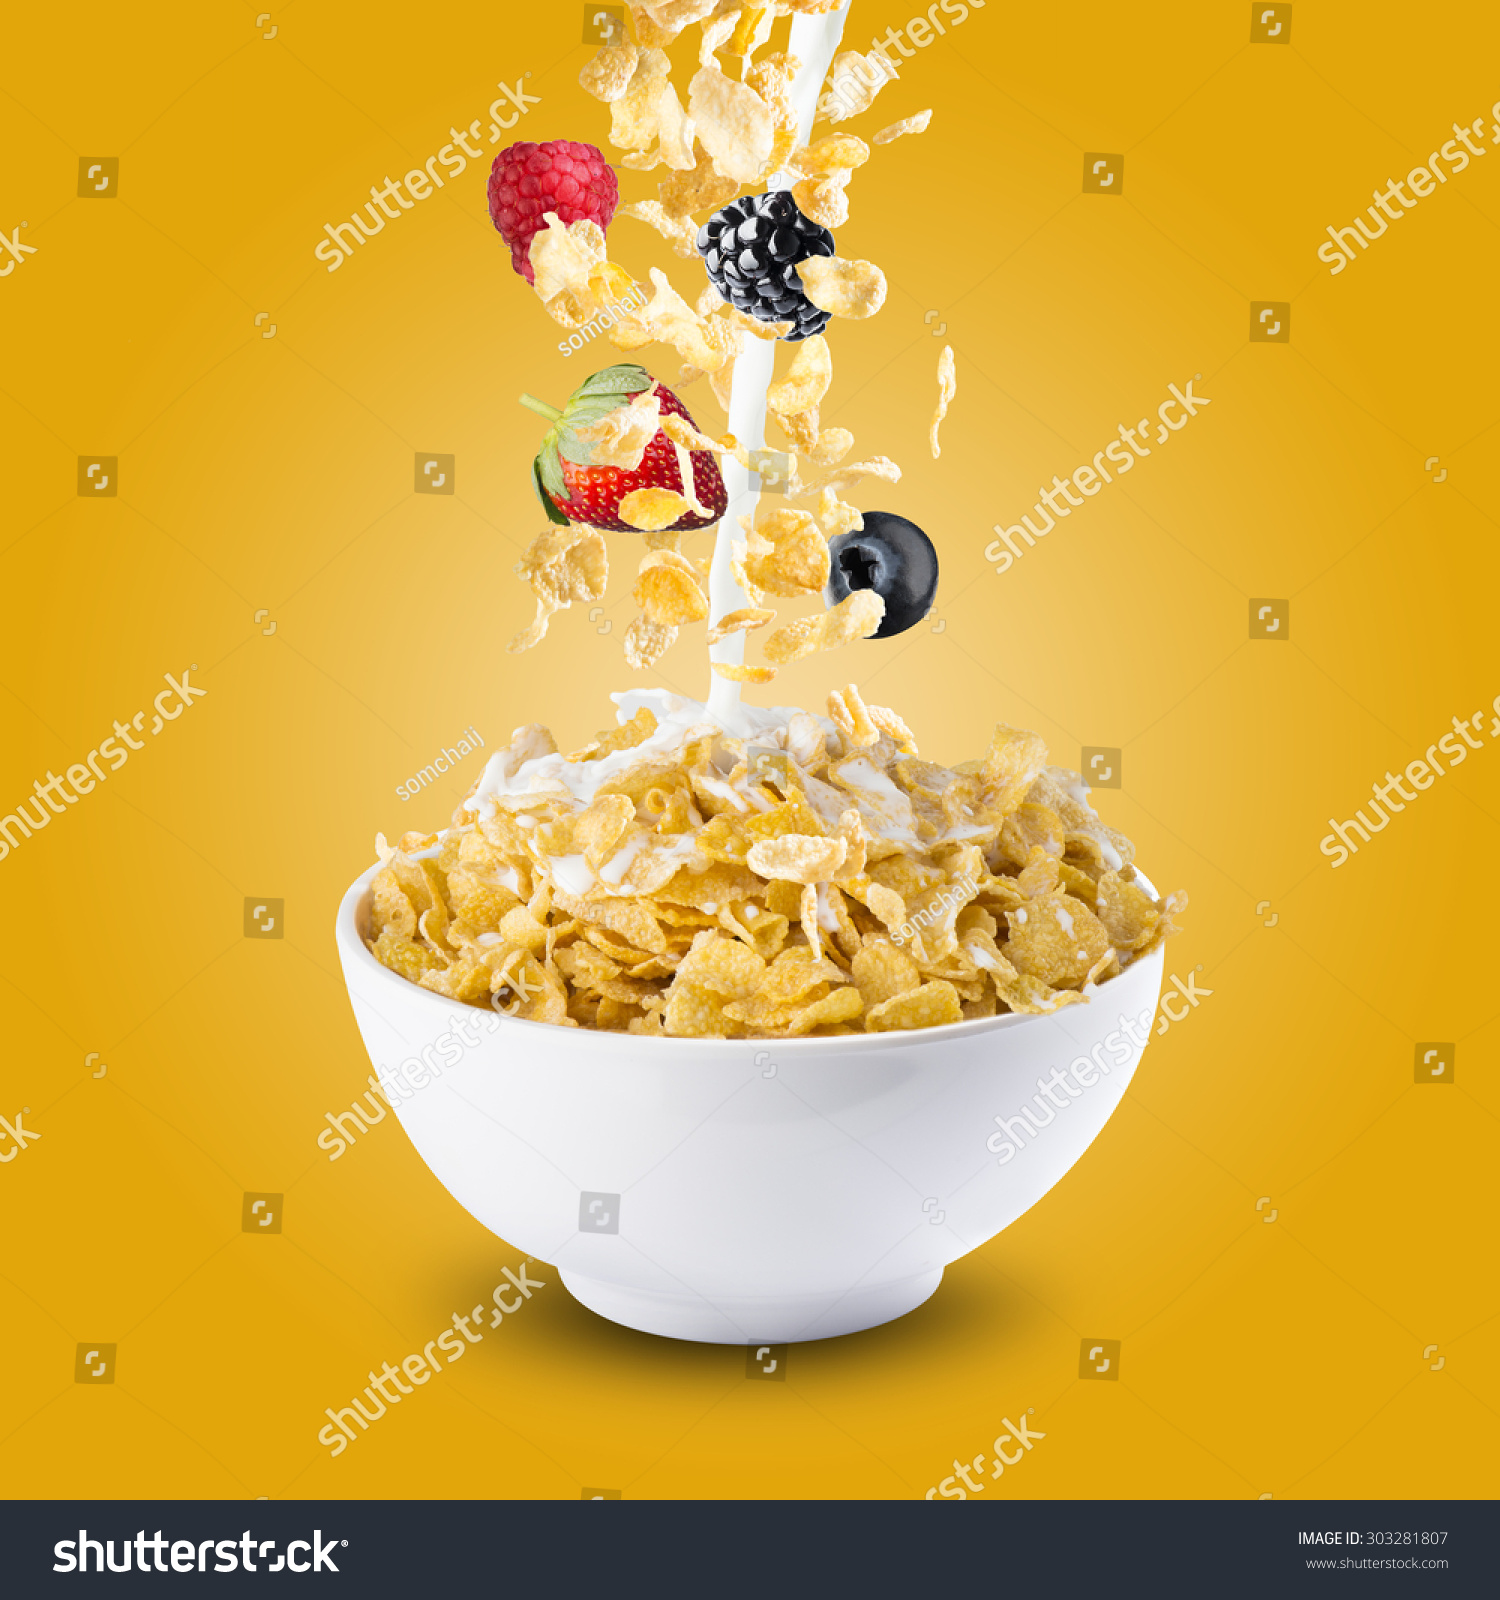 Various Berries Falling Into Bowl of Cereal With Milk Splash #303281807